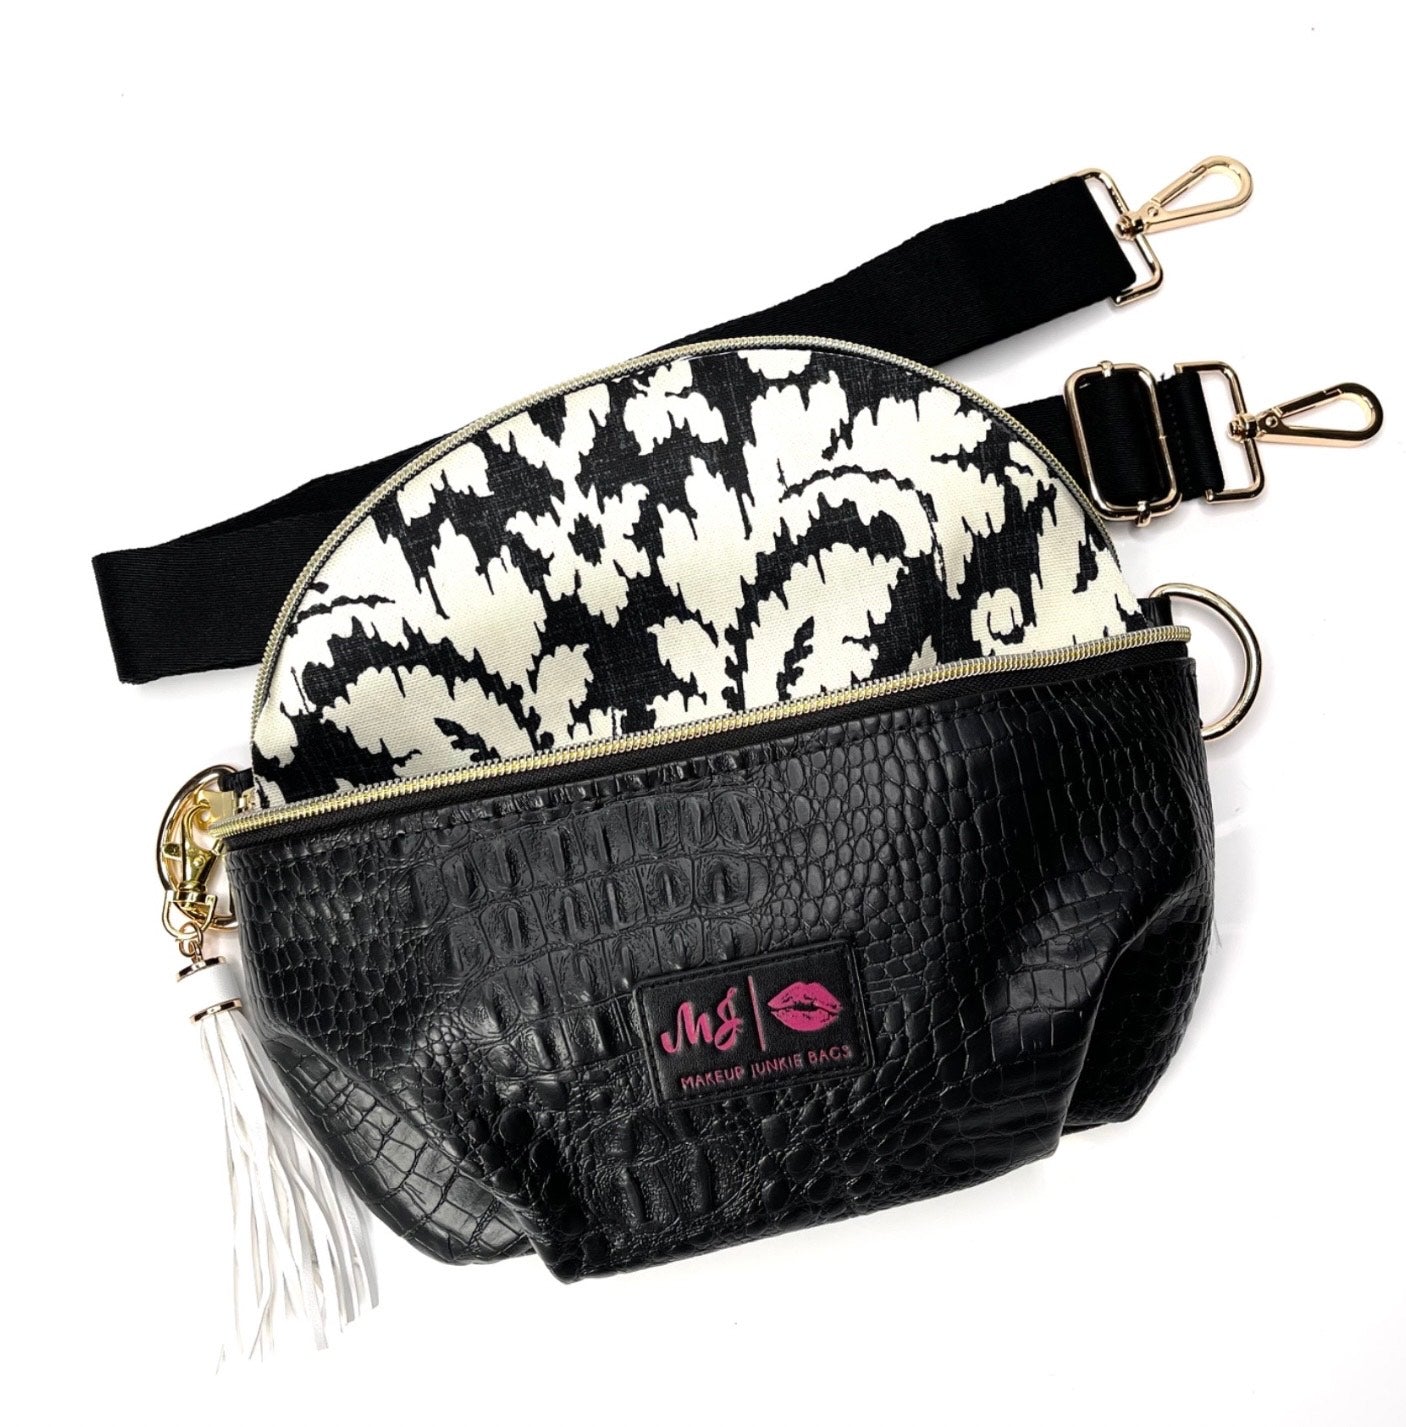 Sidekick Bag Shade of Onyx (Comes with a basic onyx strap. Please check out our selection of additional decorative straps for purchase.)